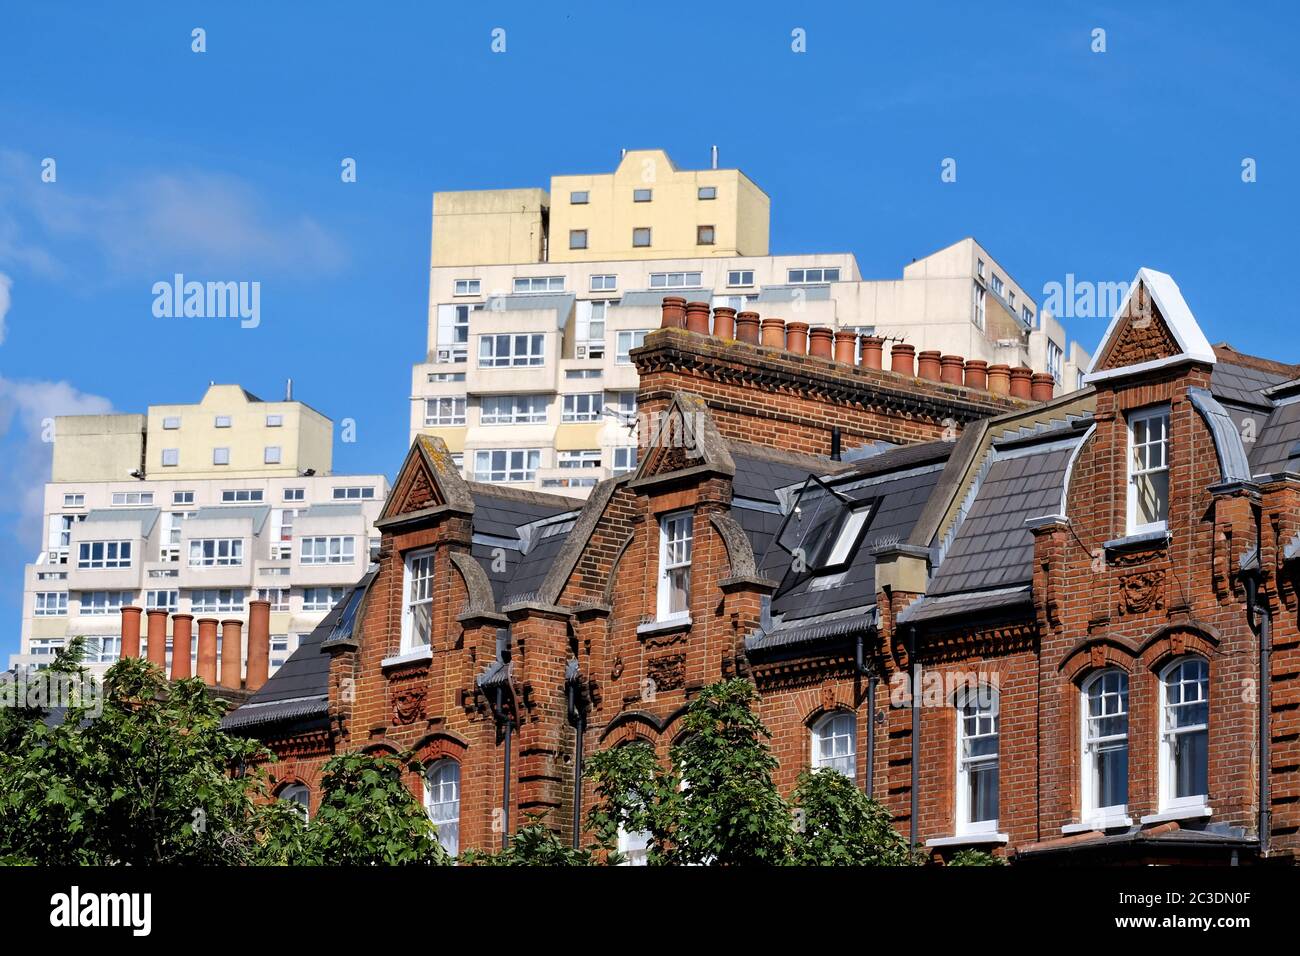 Edwardian red-brick housing Stockwell, south London with the Brutalist style towers of Beckett and Pinter house seen behind. Stock Photo